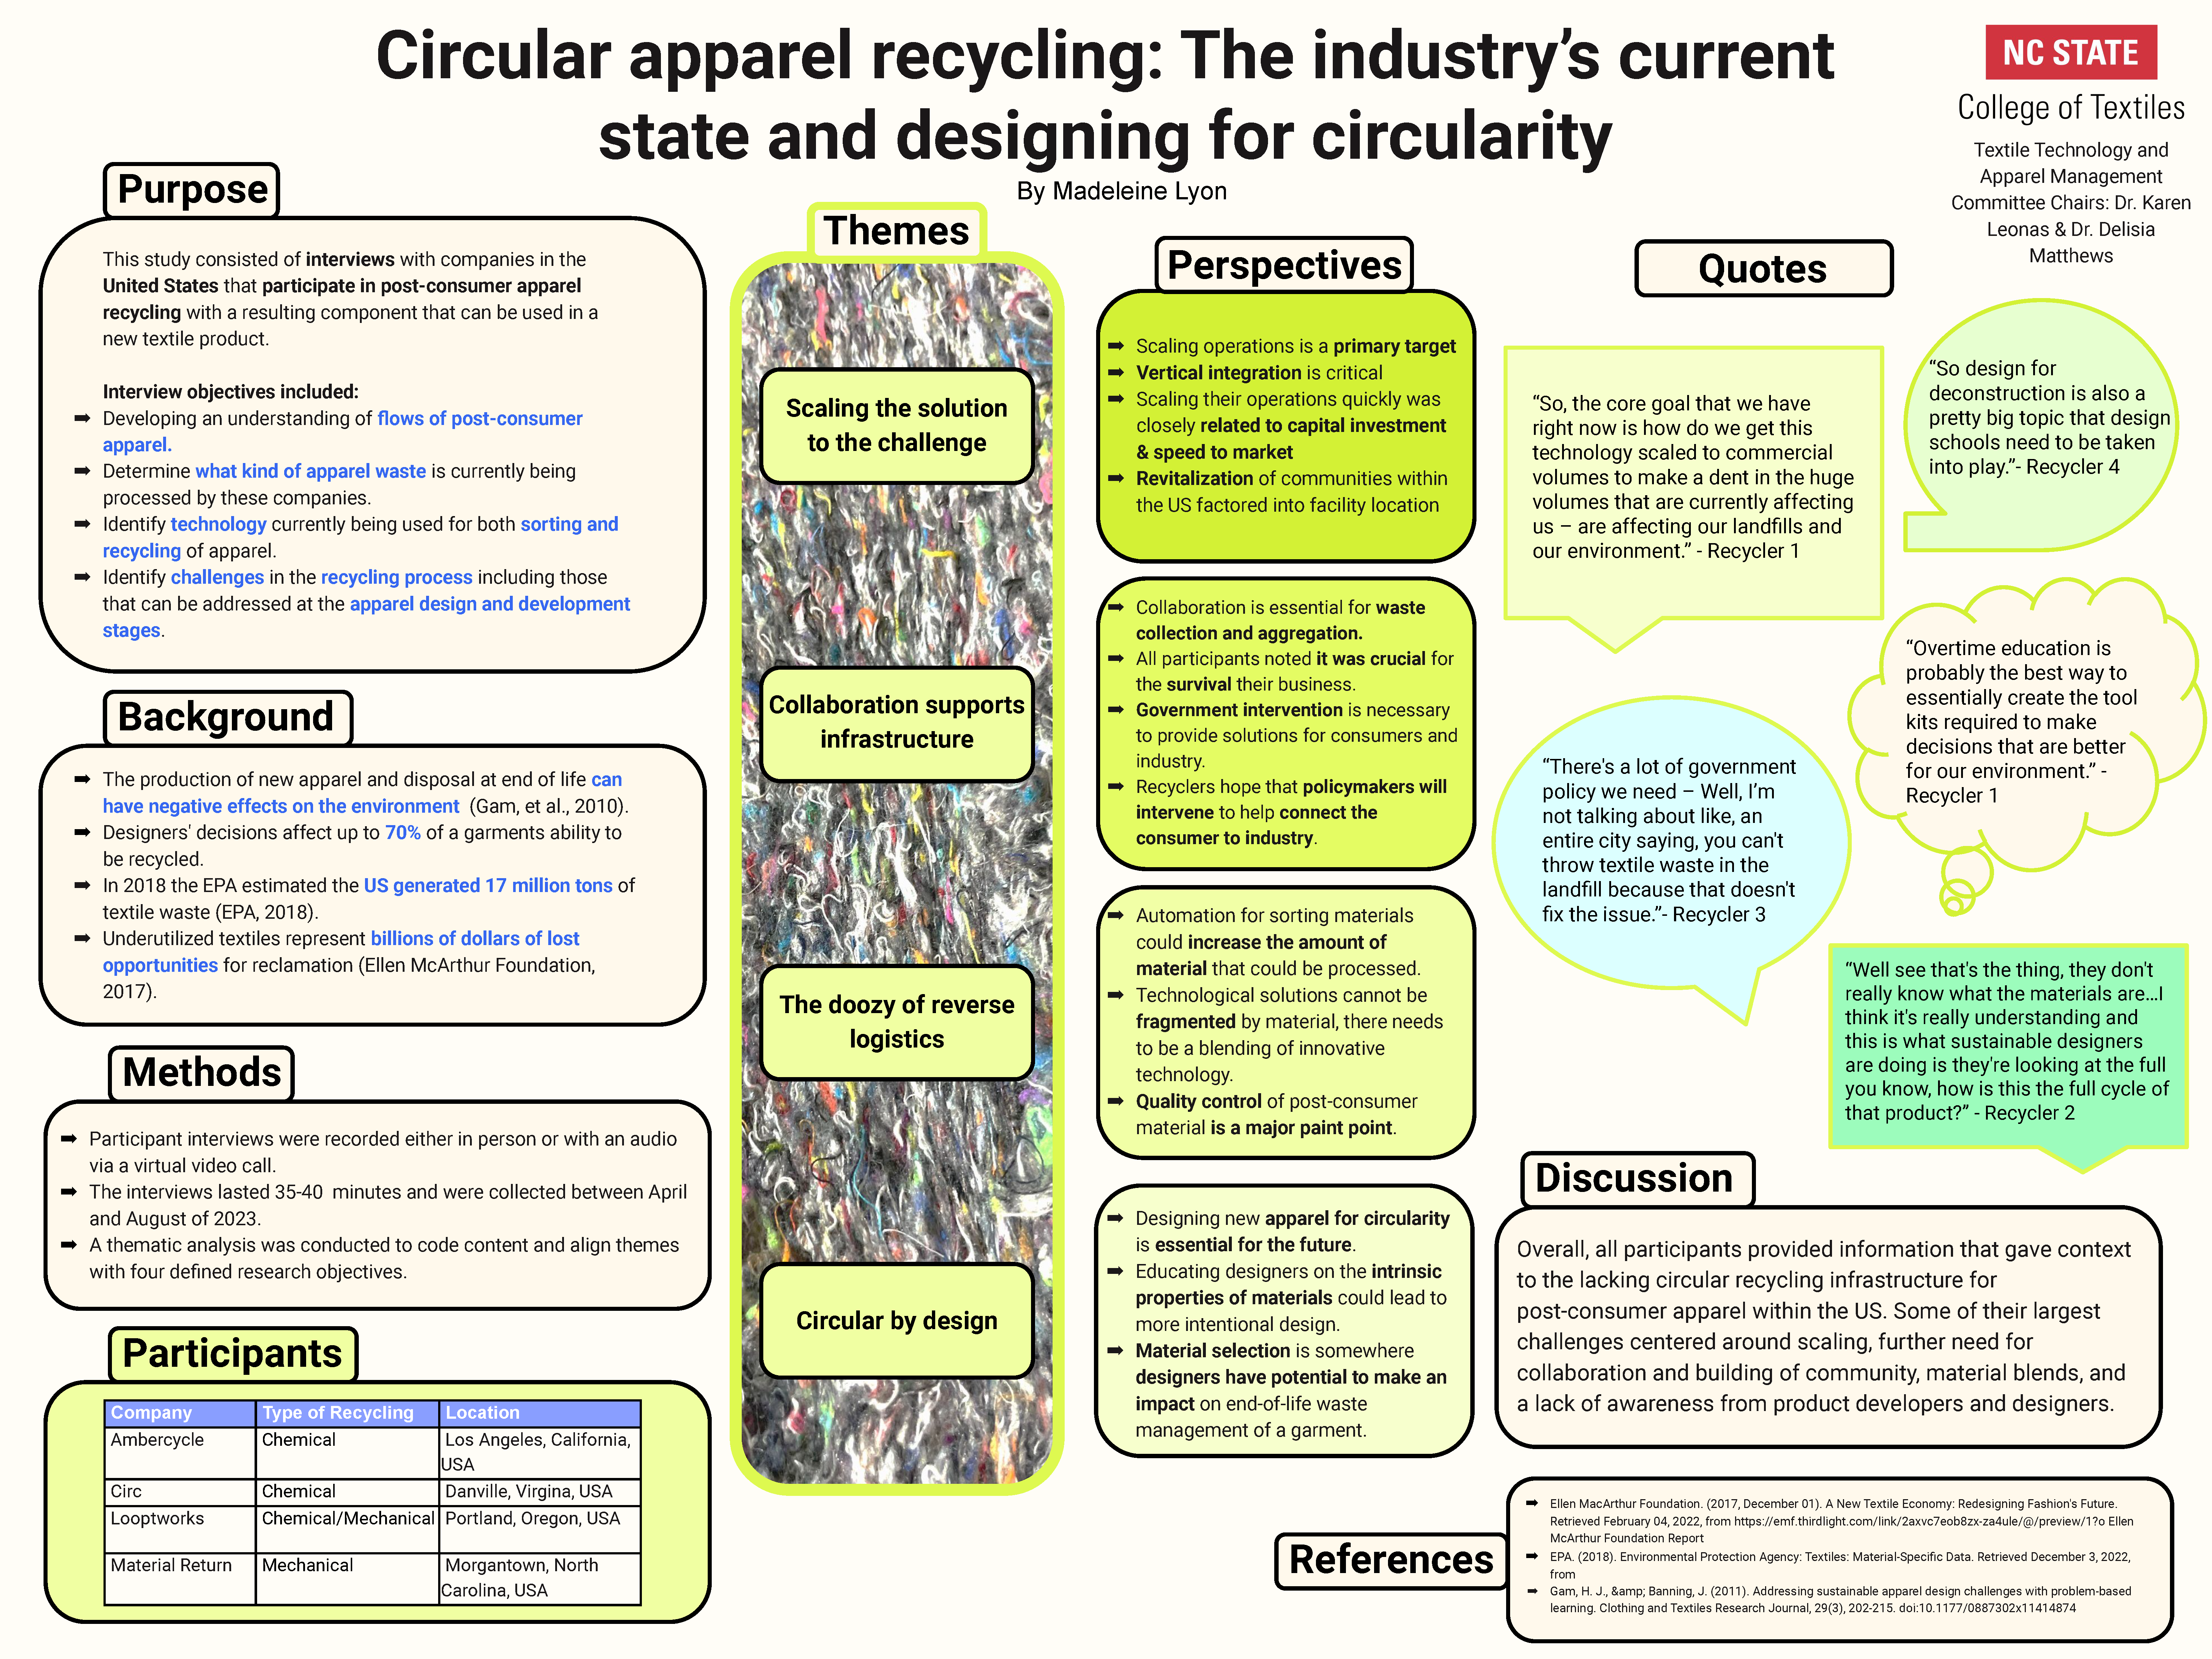 image of Madeleine Lyon's poster, "Circular apparel recycling: The industry's current state and designing for circularity"